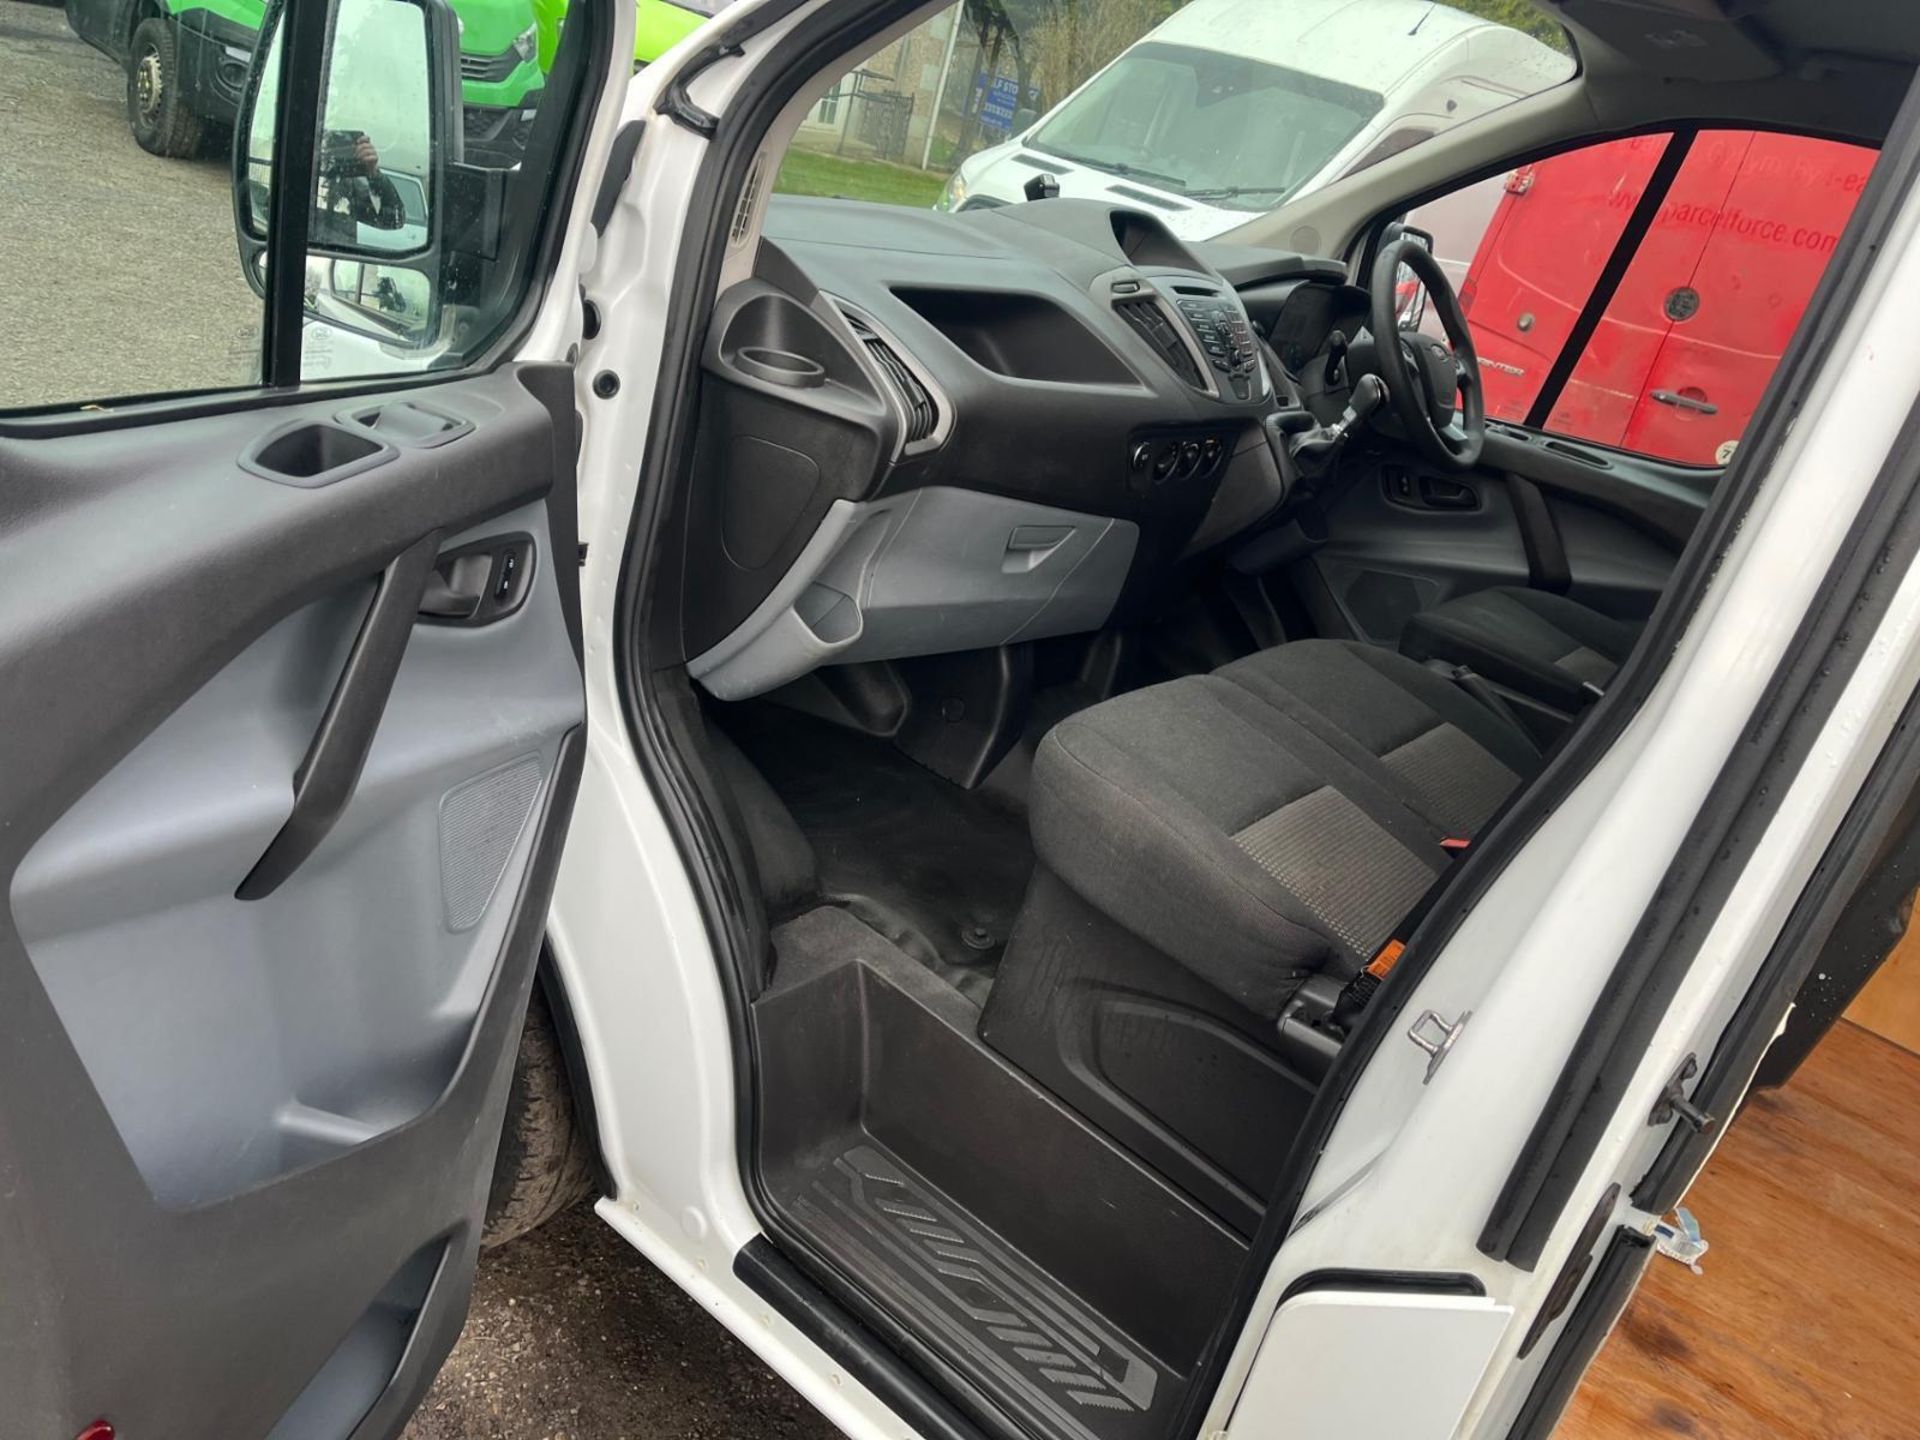 2018 FORD TRANSIT CUSTOM TDCI 130 L1 H1 SWB PANEL VAN ->>>SPECIAL CLEARANCE<<< - Image 8 of 15